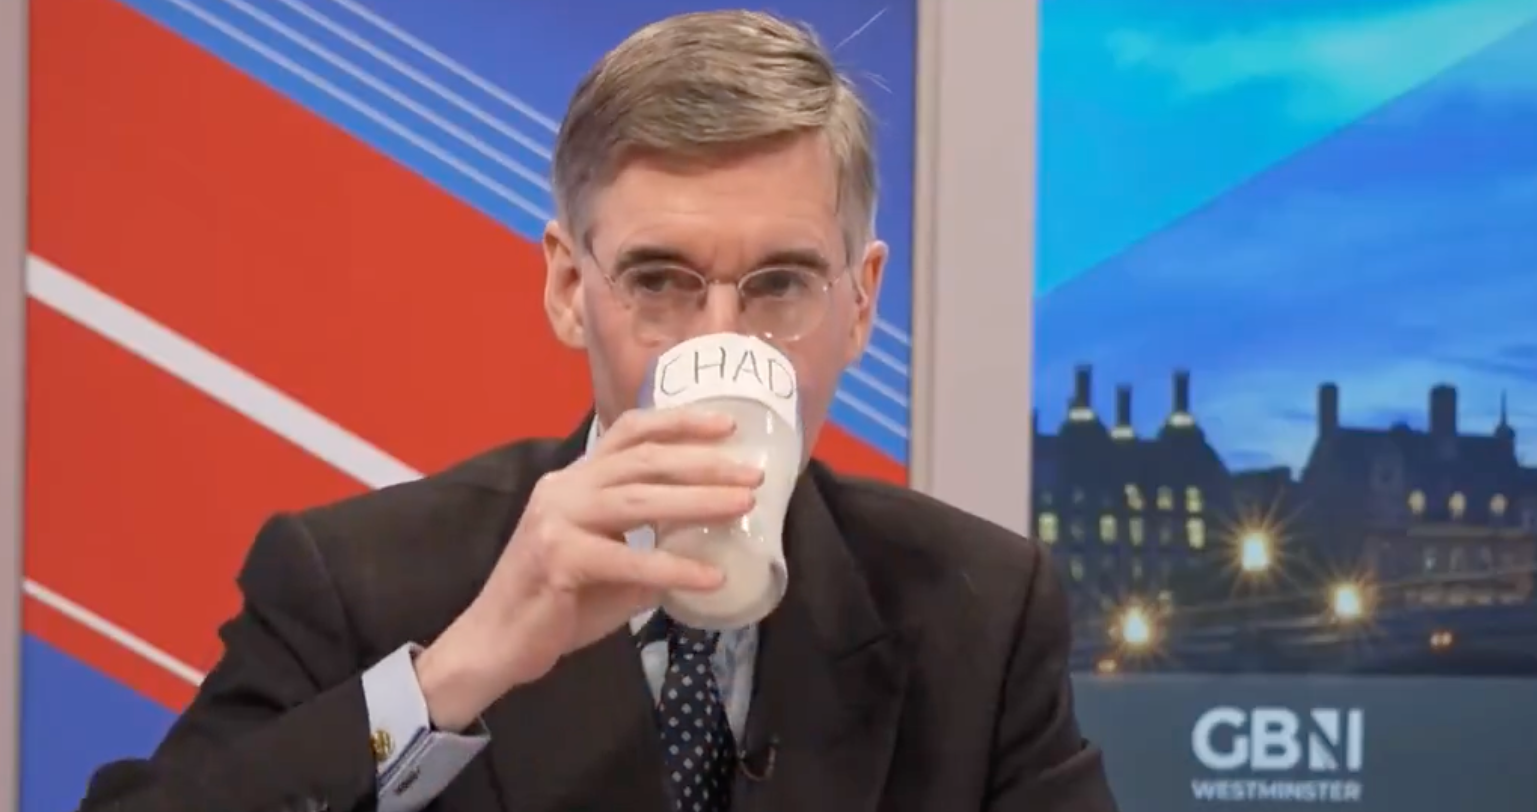 Jacob Rees-Mogg insisted only full-fat milk will “nourish your inner Tory”